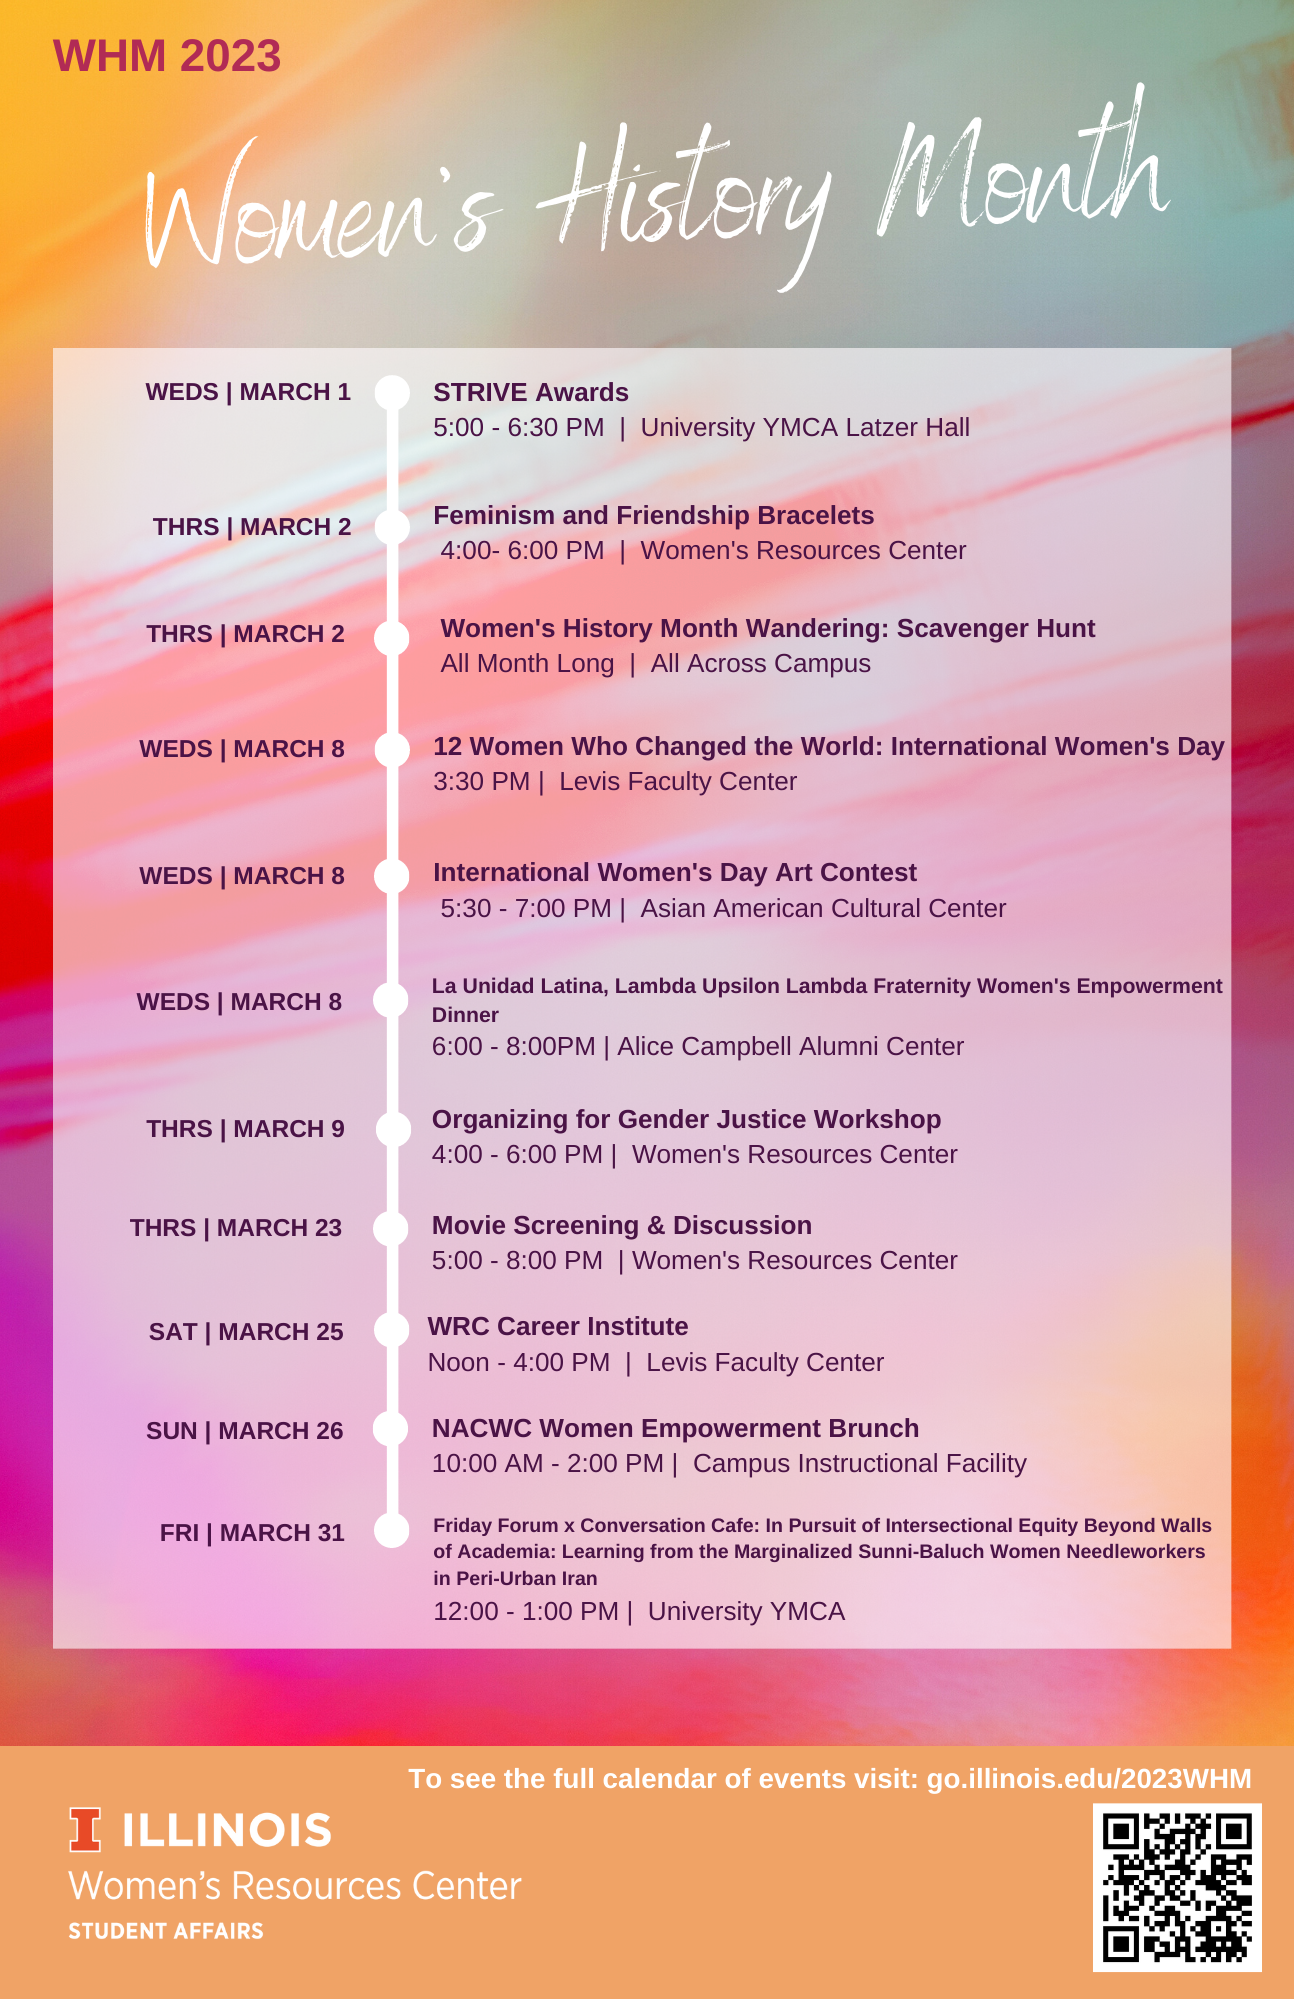 2023 Women's History Month schedule poster with bright, streaks of angled orange, red, and purple colors in background